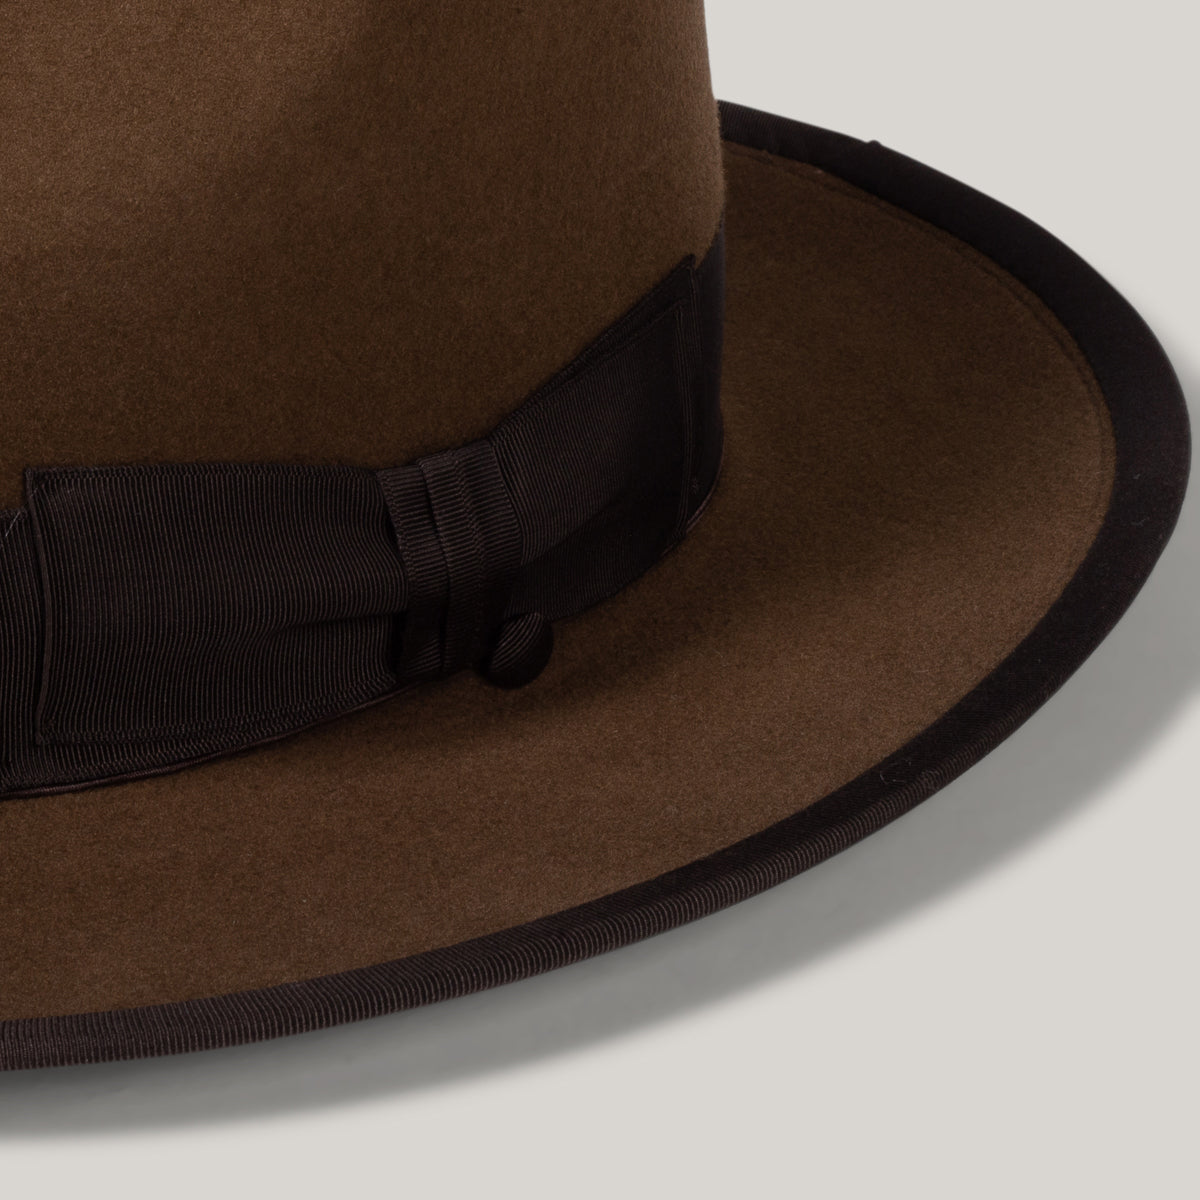 H.W. DOG & CO. POINT-H HAT - BROWN